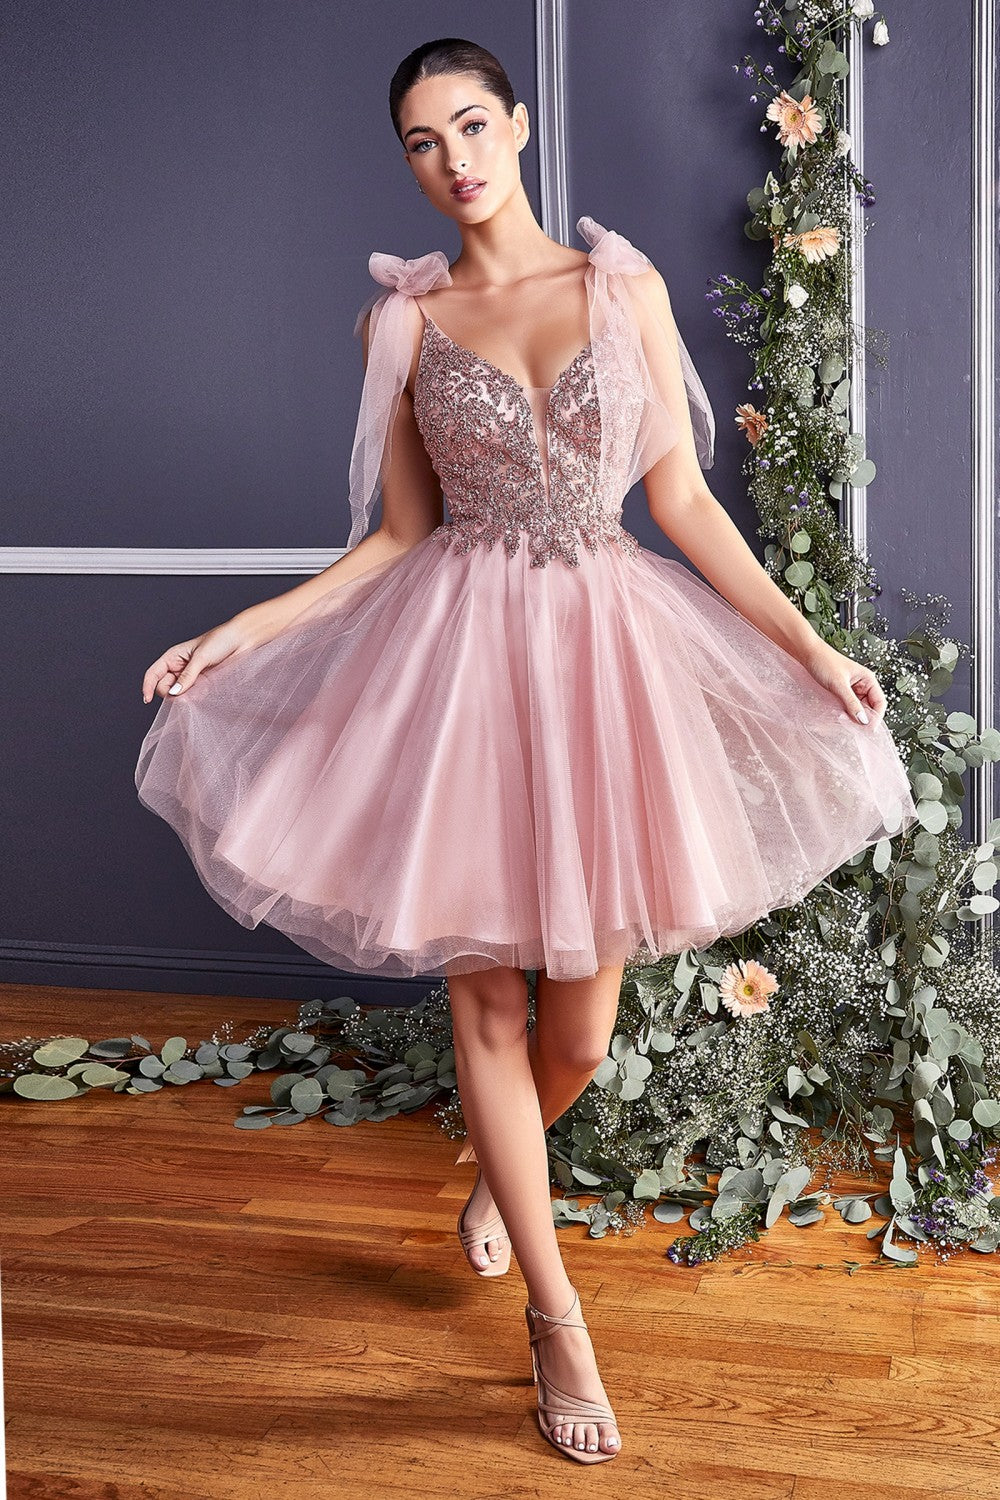 A-Line Mini Cocktail Dress Deep illusion V-neckline Bodice Sequin Embellished Corset Pretty Prom & Bridesmiad Gown CDCD0174 Elsy Style Cocktail Dress